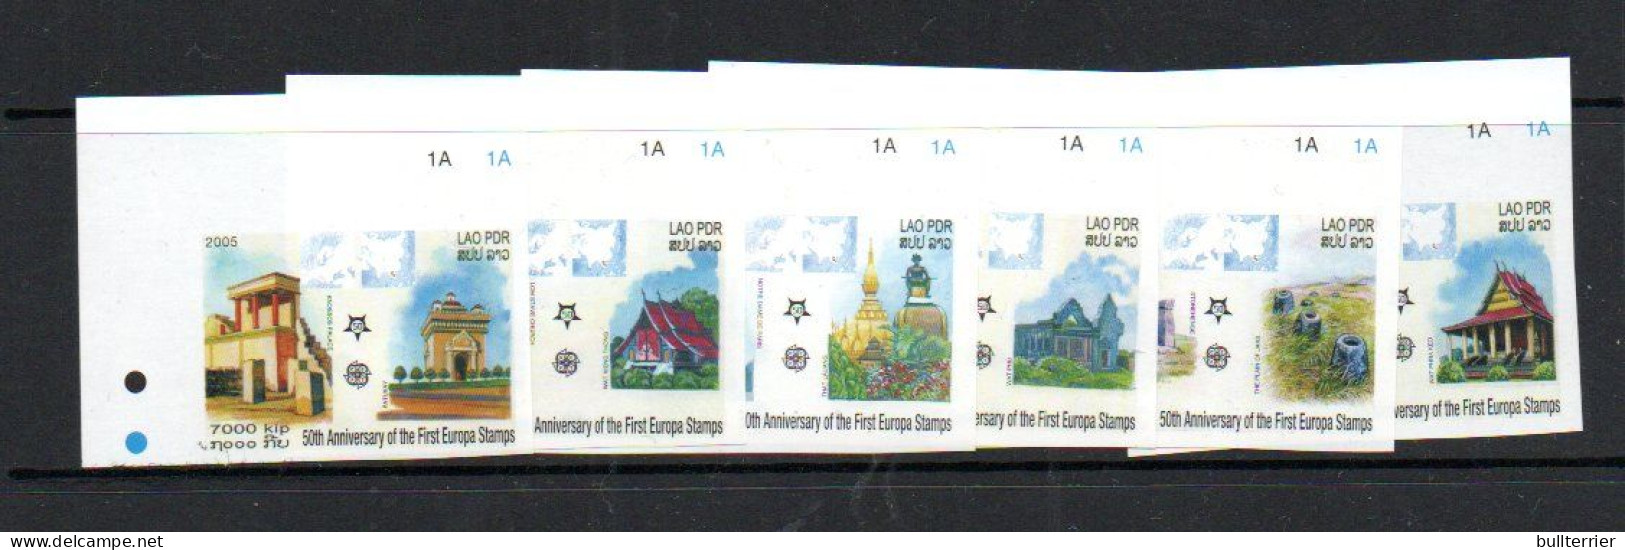 LAOS -  2005-  EUROPA STAMPS ANNIERSARY SET OF 6  IMPERF MINT NEVER HINGED,SG CAT £18.50 - Laos